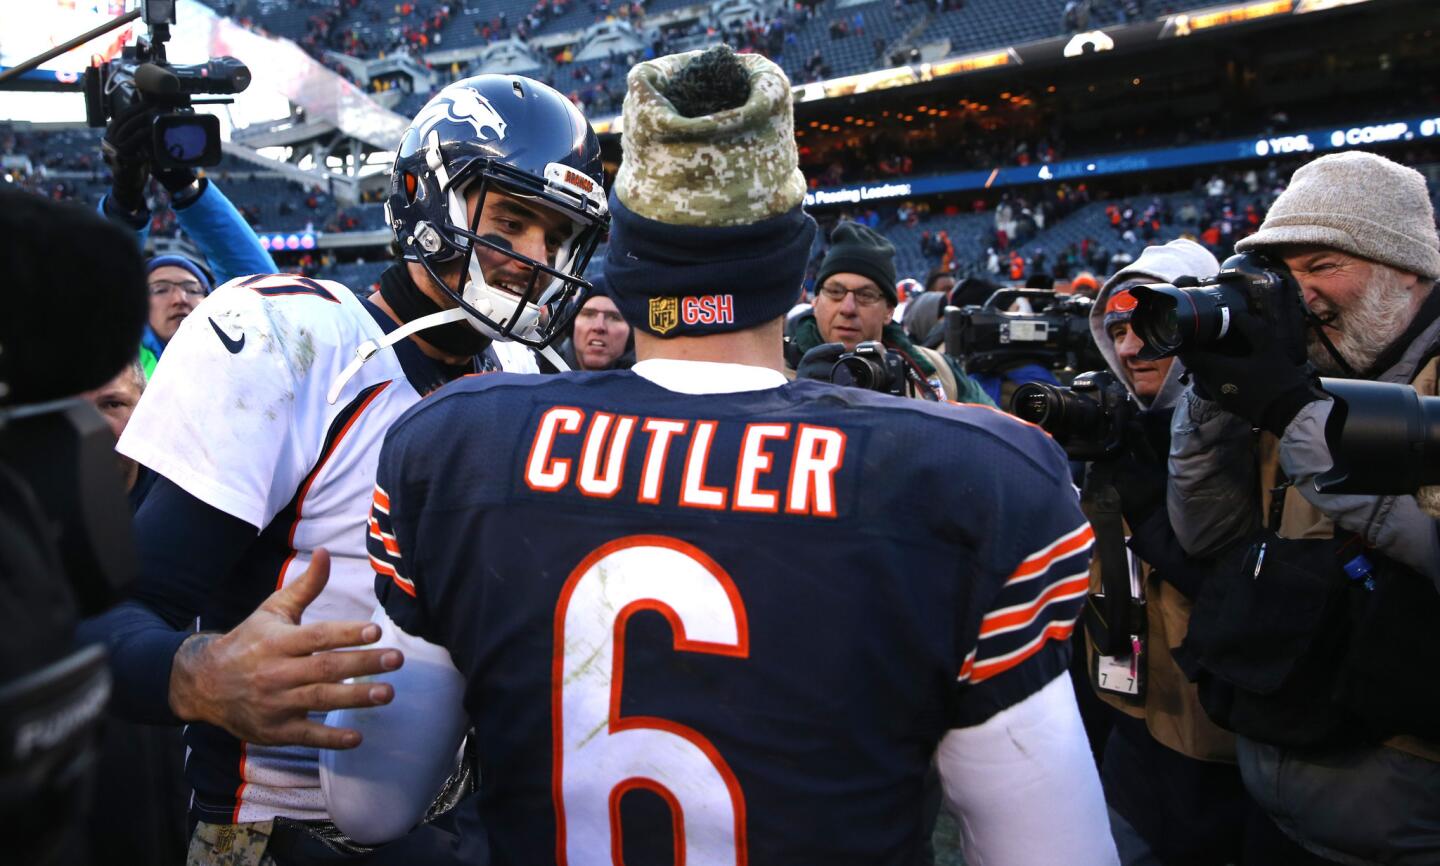 Denver Broncos quarterback Brock Osweiler and Chicago Bears quarterback Jay Cutler greet one another after a Bears loss at Soldier Field in Chicago on Sunday, Nov. 22, 2015.